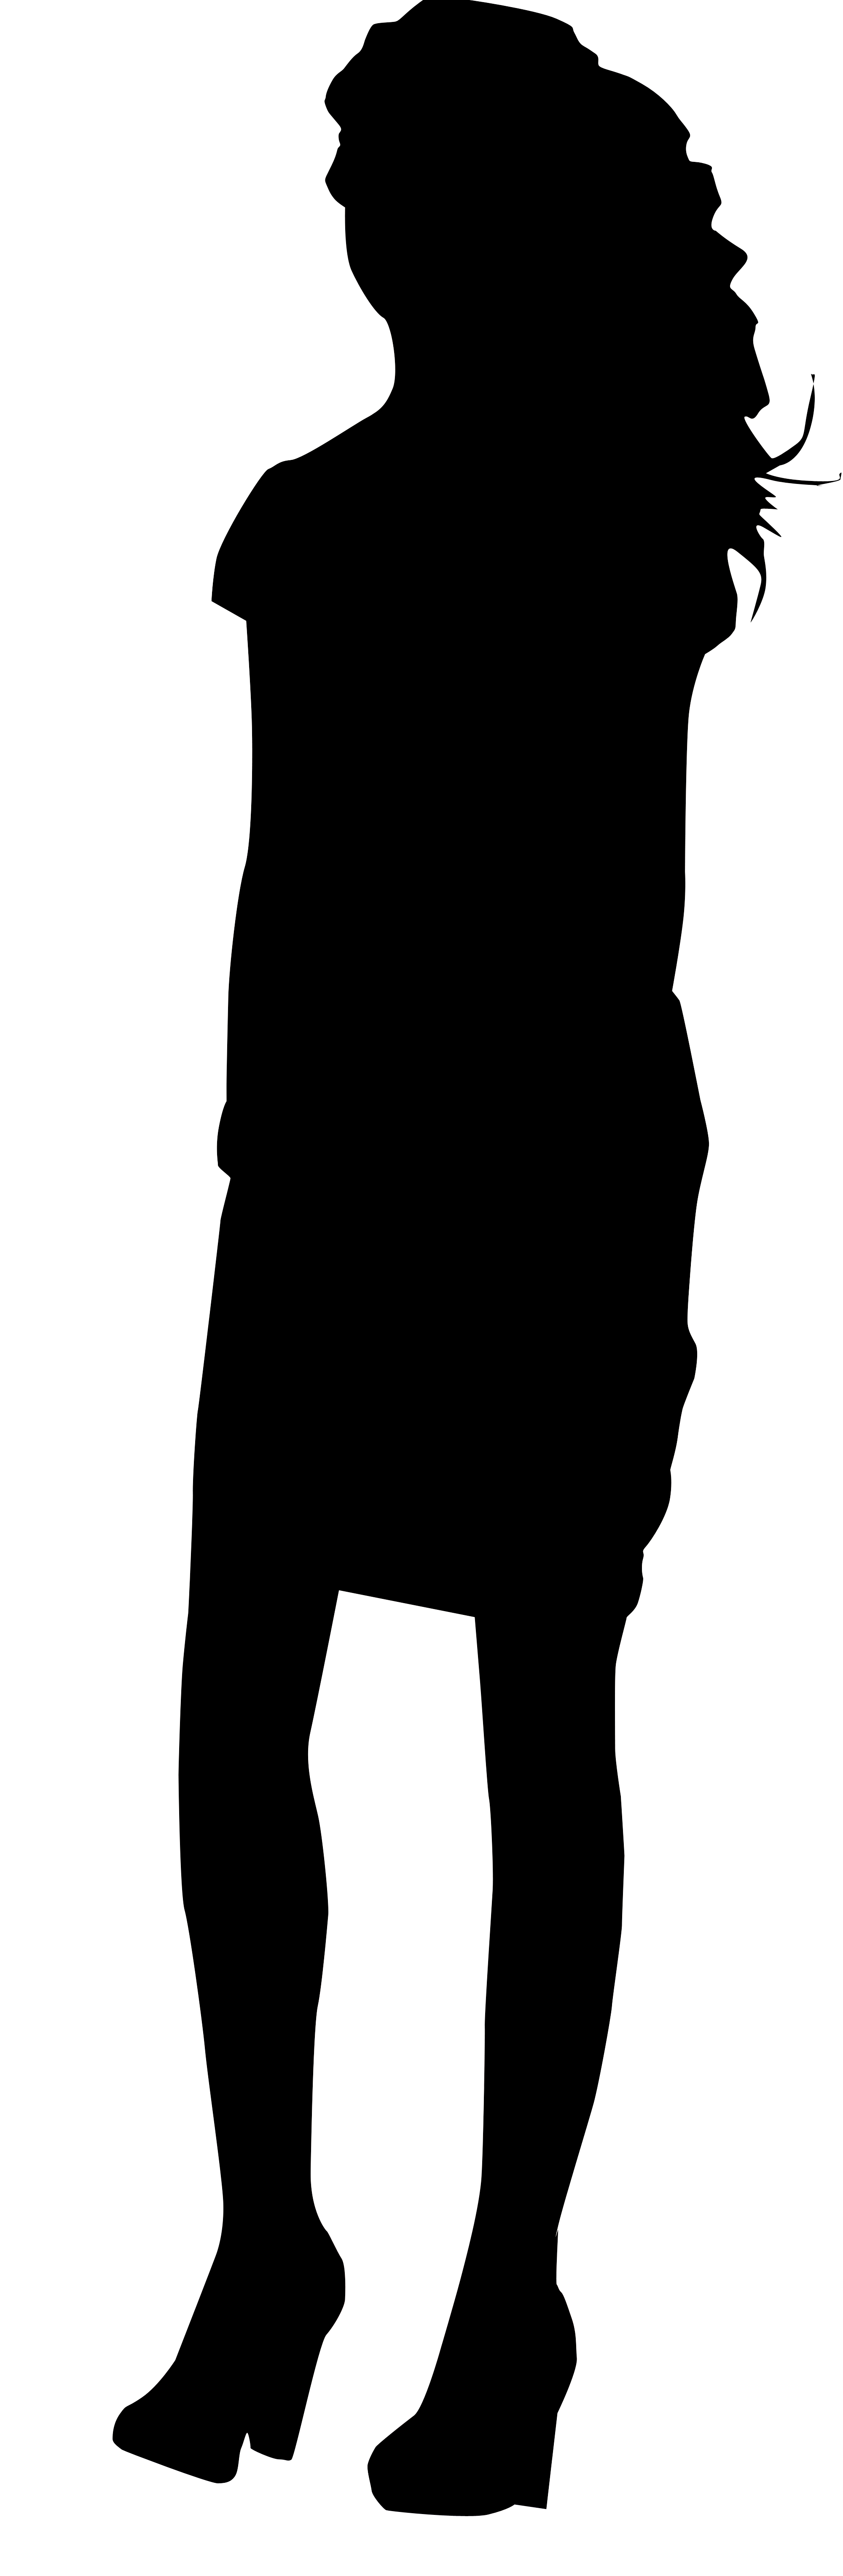 Free Silhouette Of A Woman Standing, Download Free Clip Art.